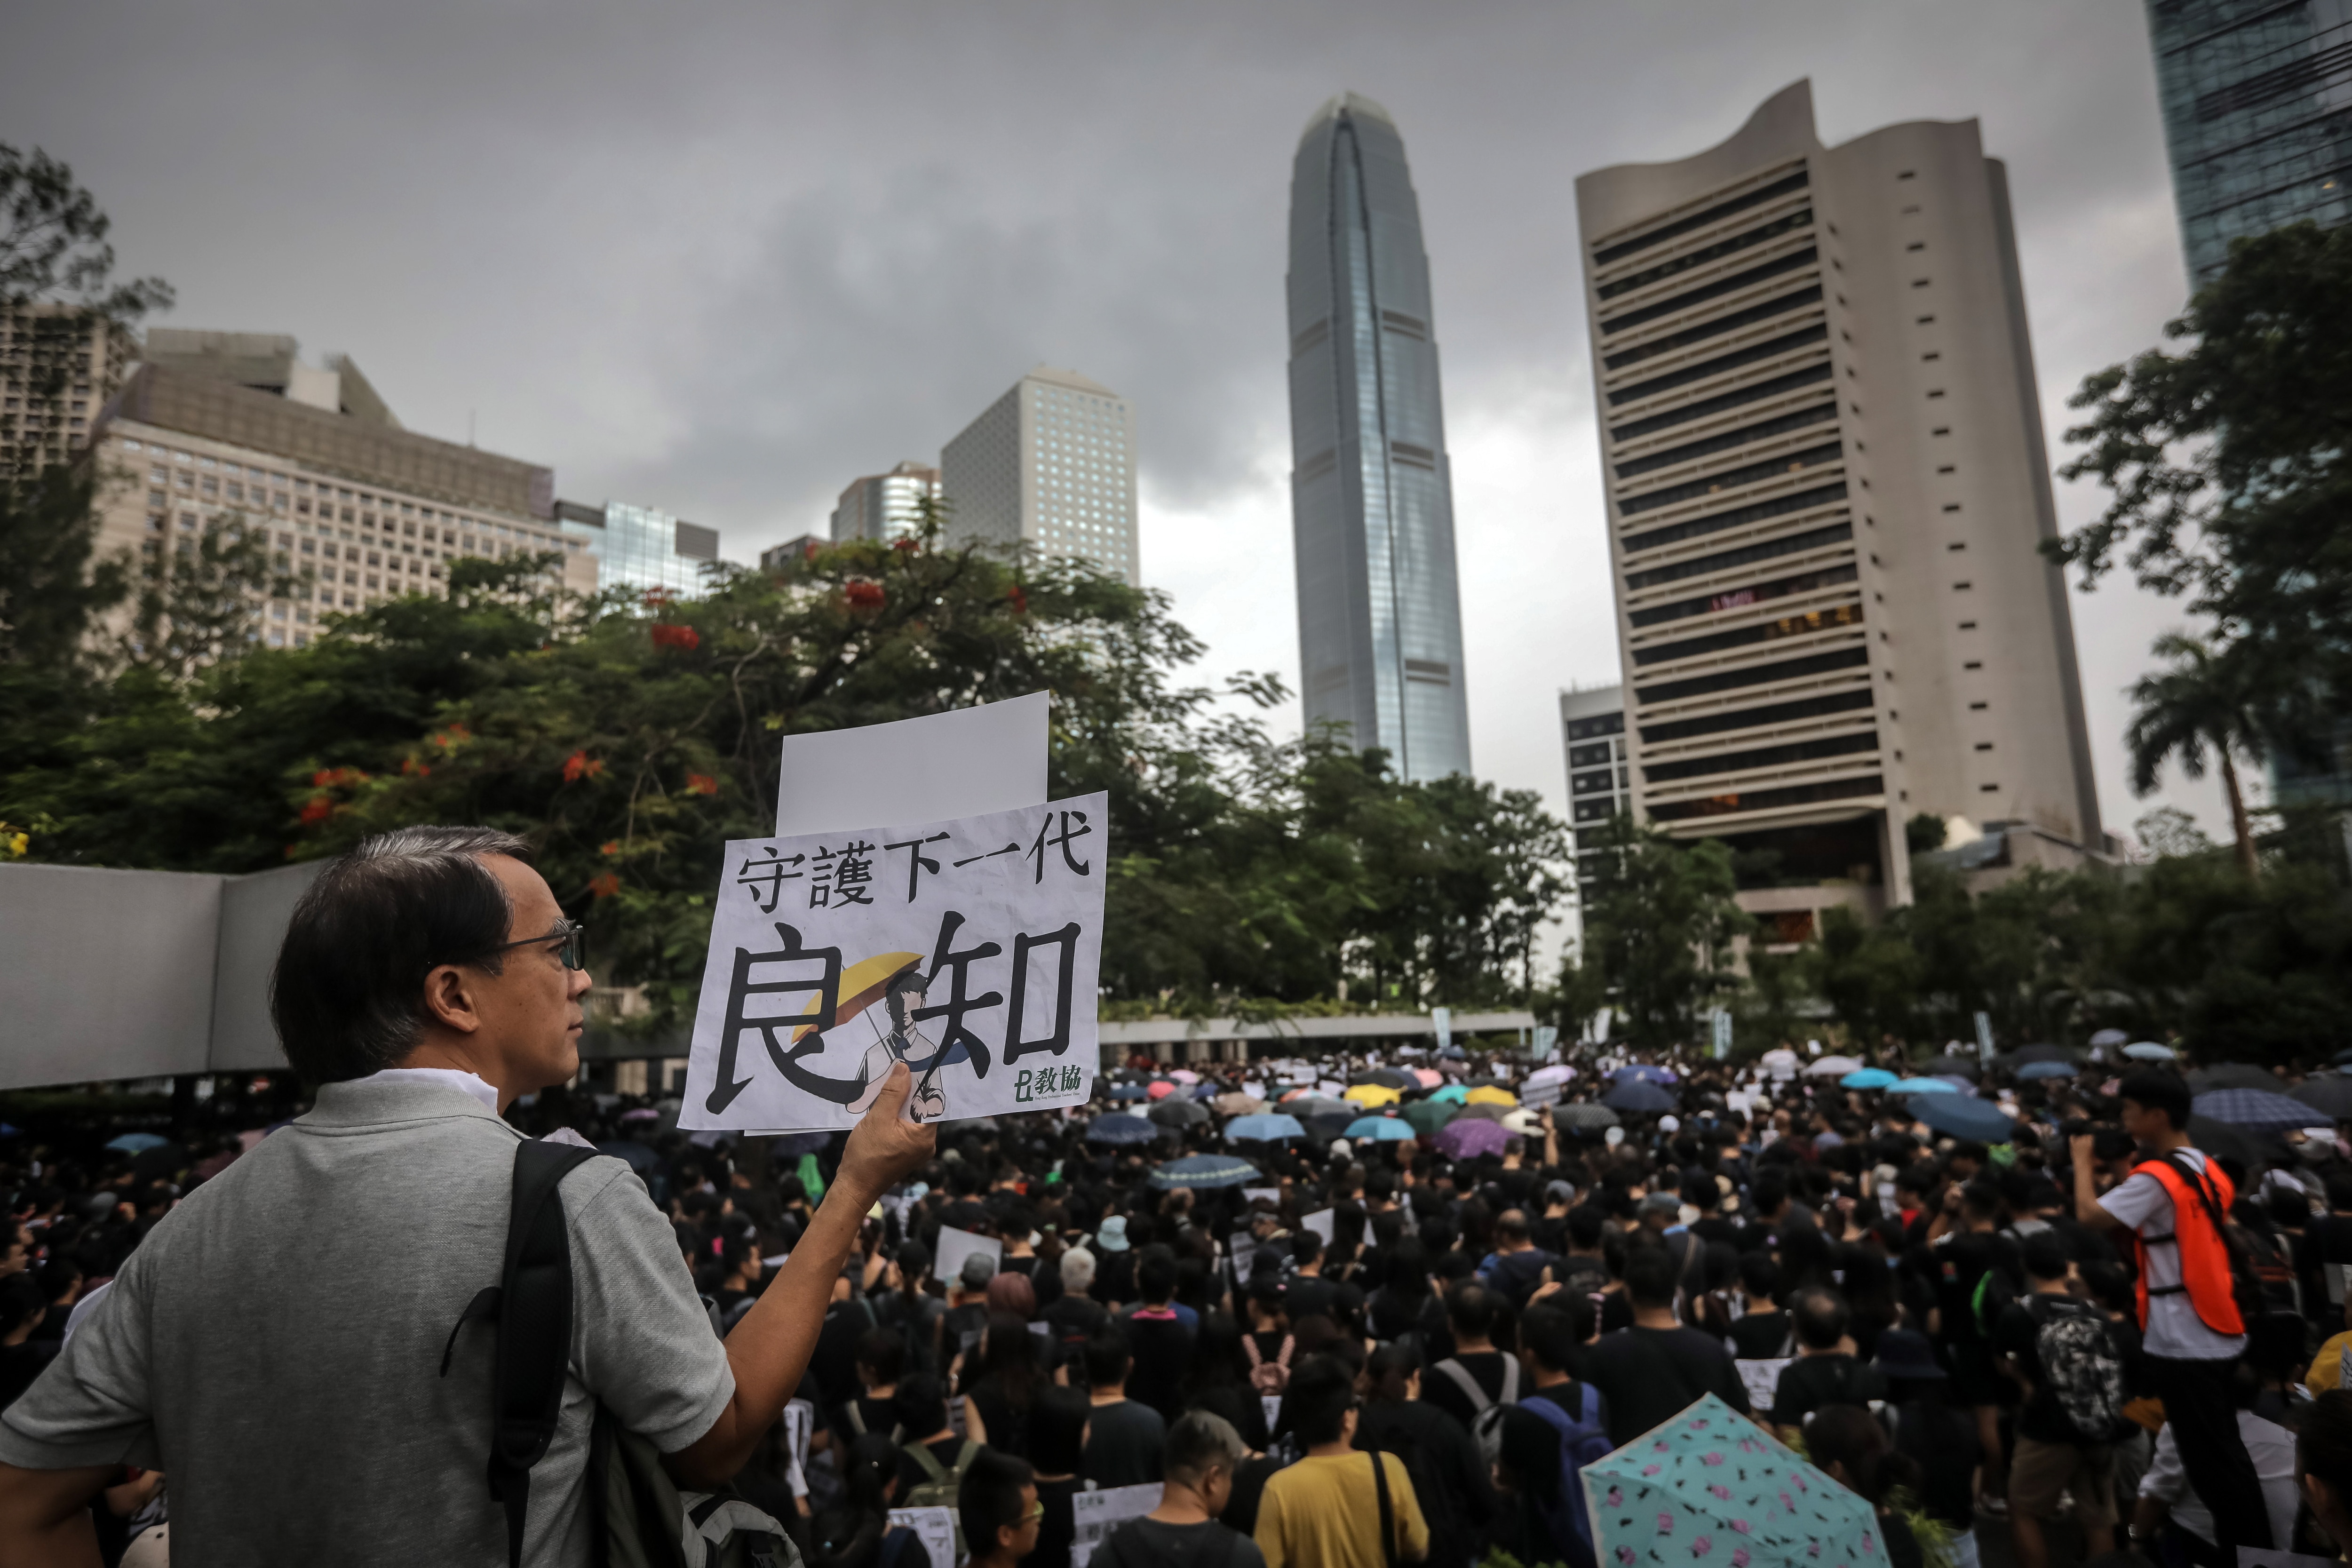 Tens of thousands flood Hong Kong park in latest protest